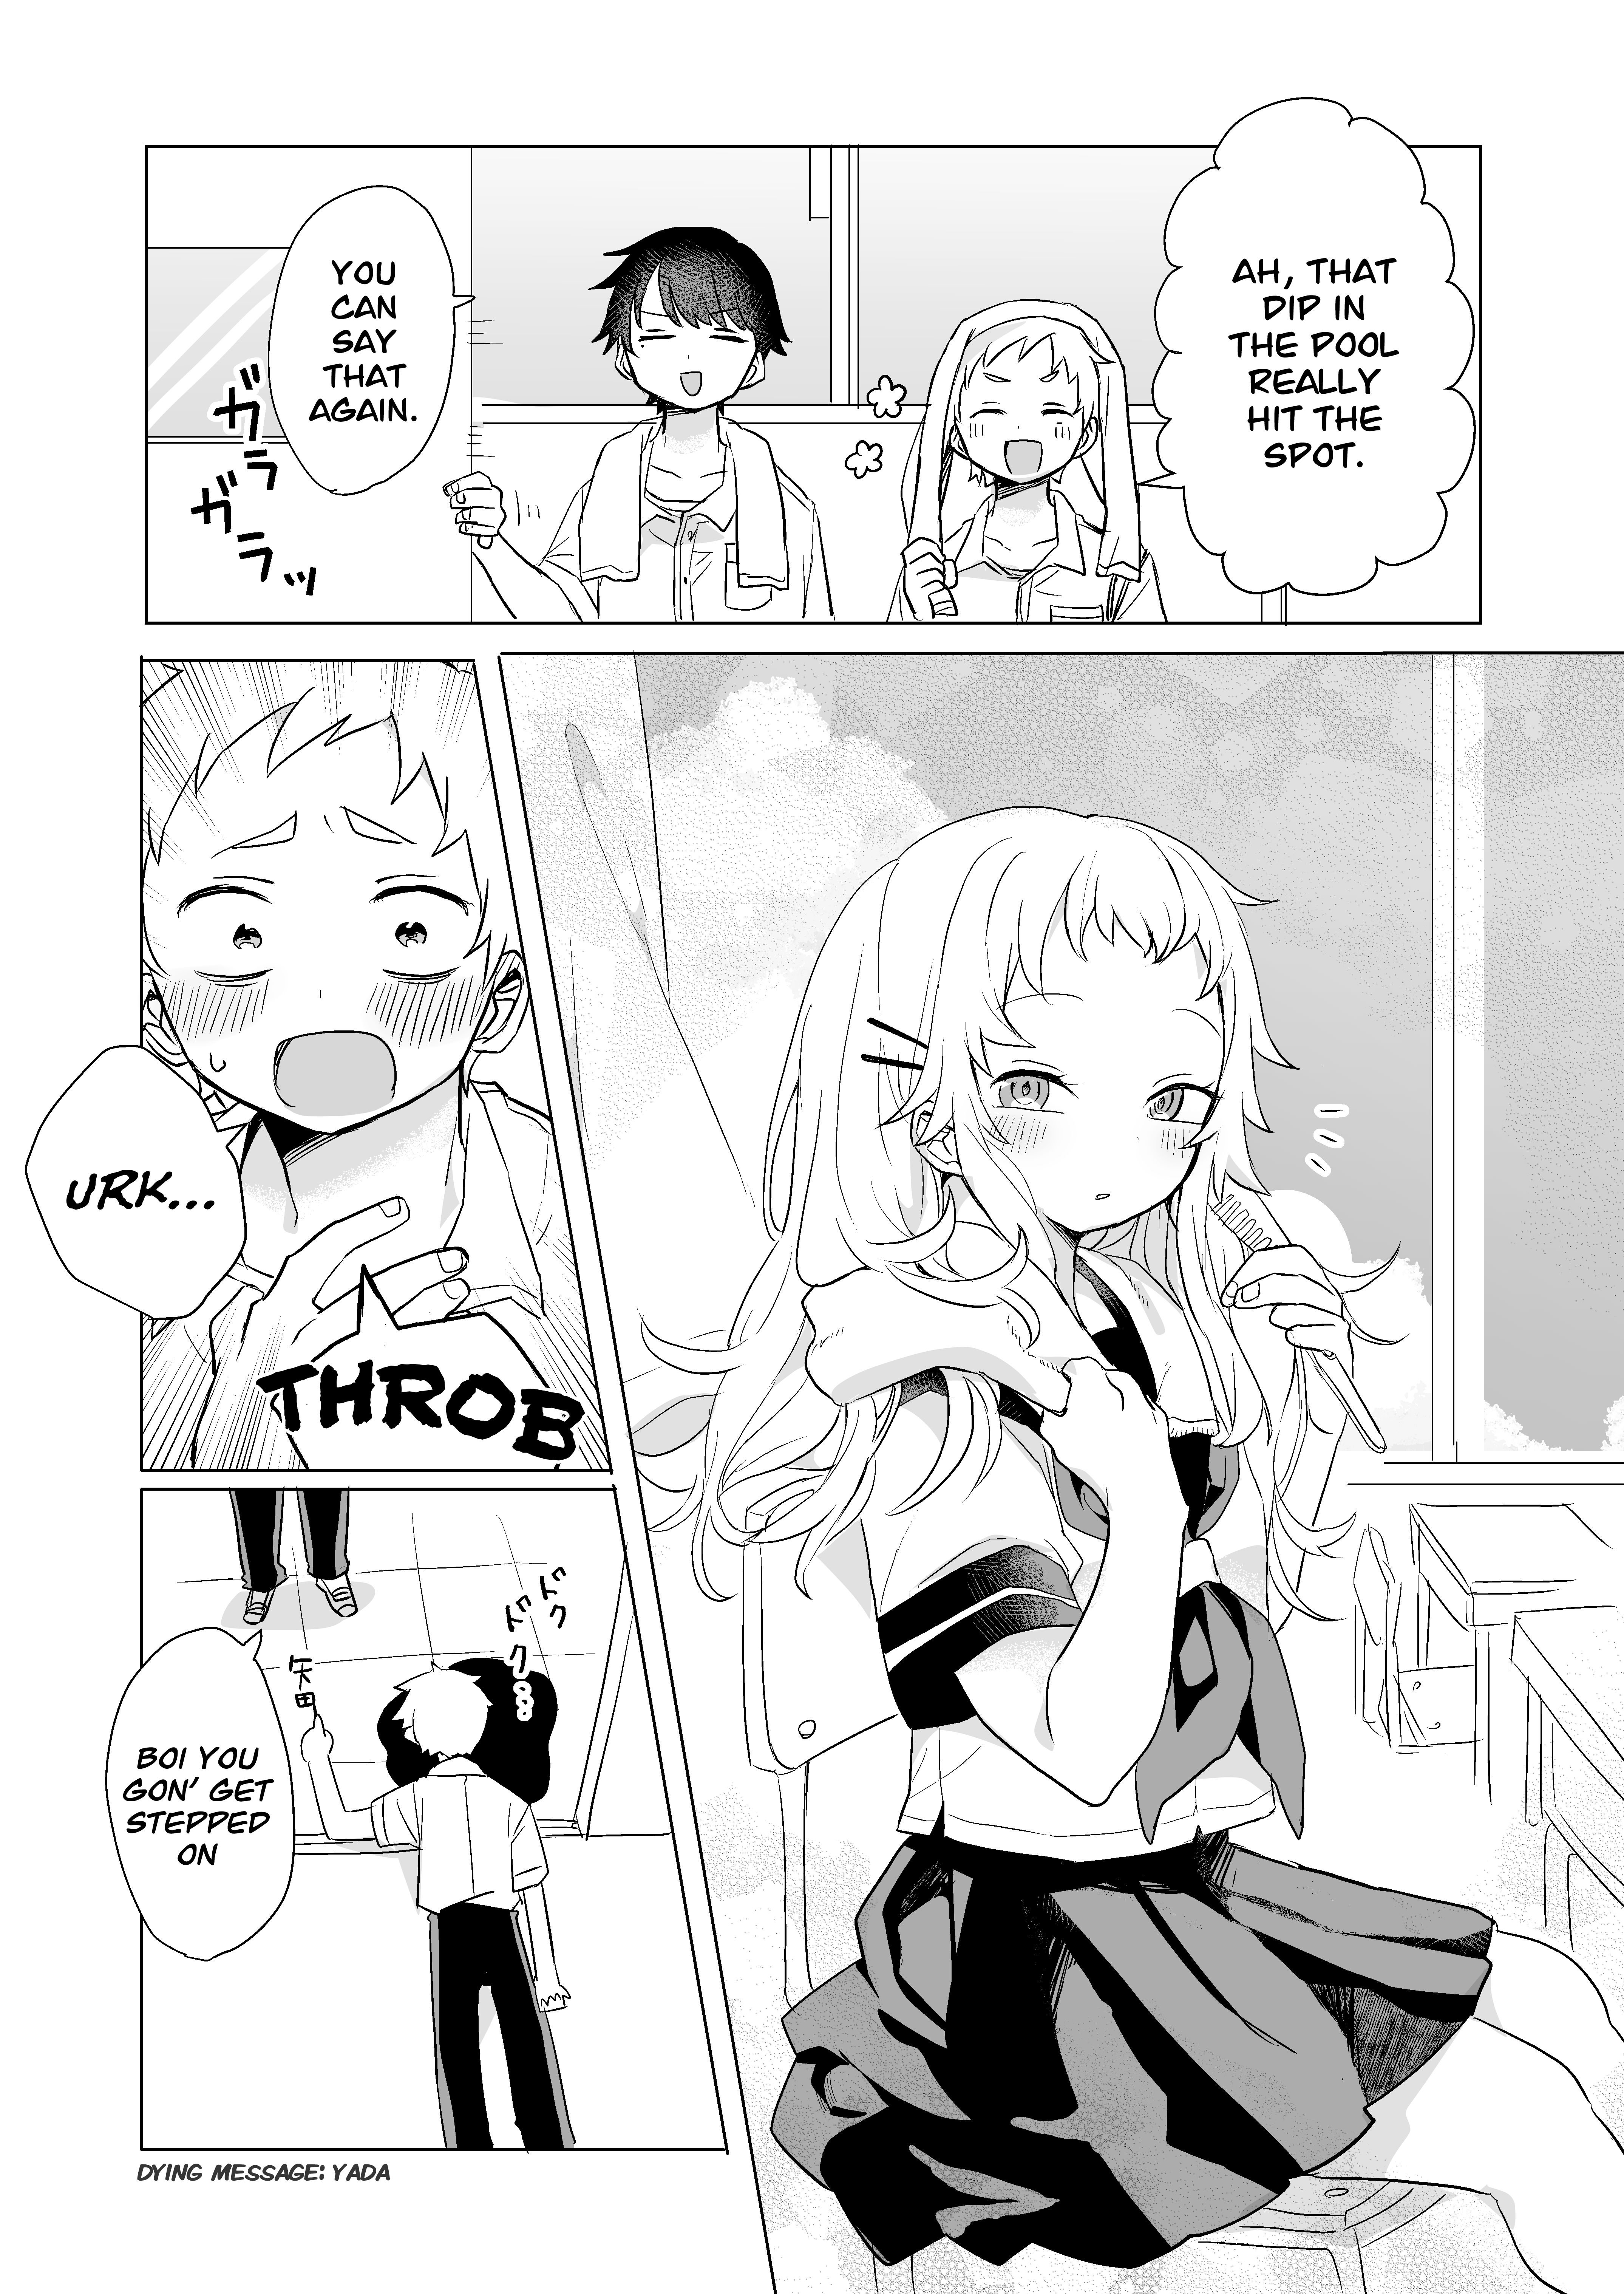 Yada-san is cold - chapter 8 - #1